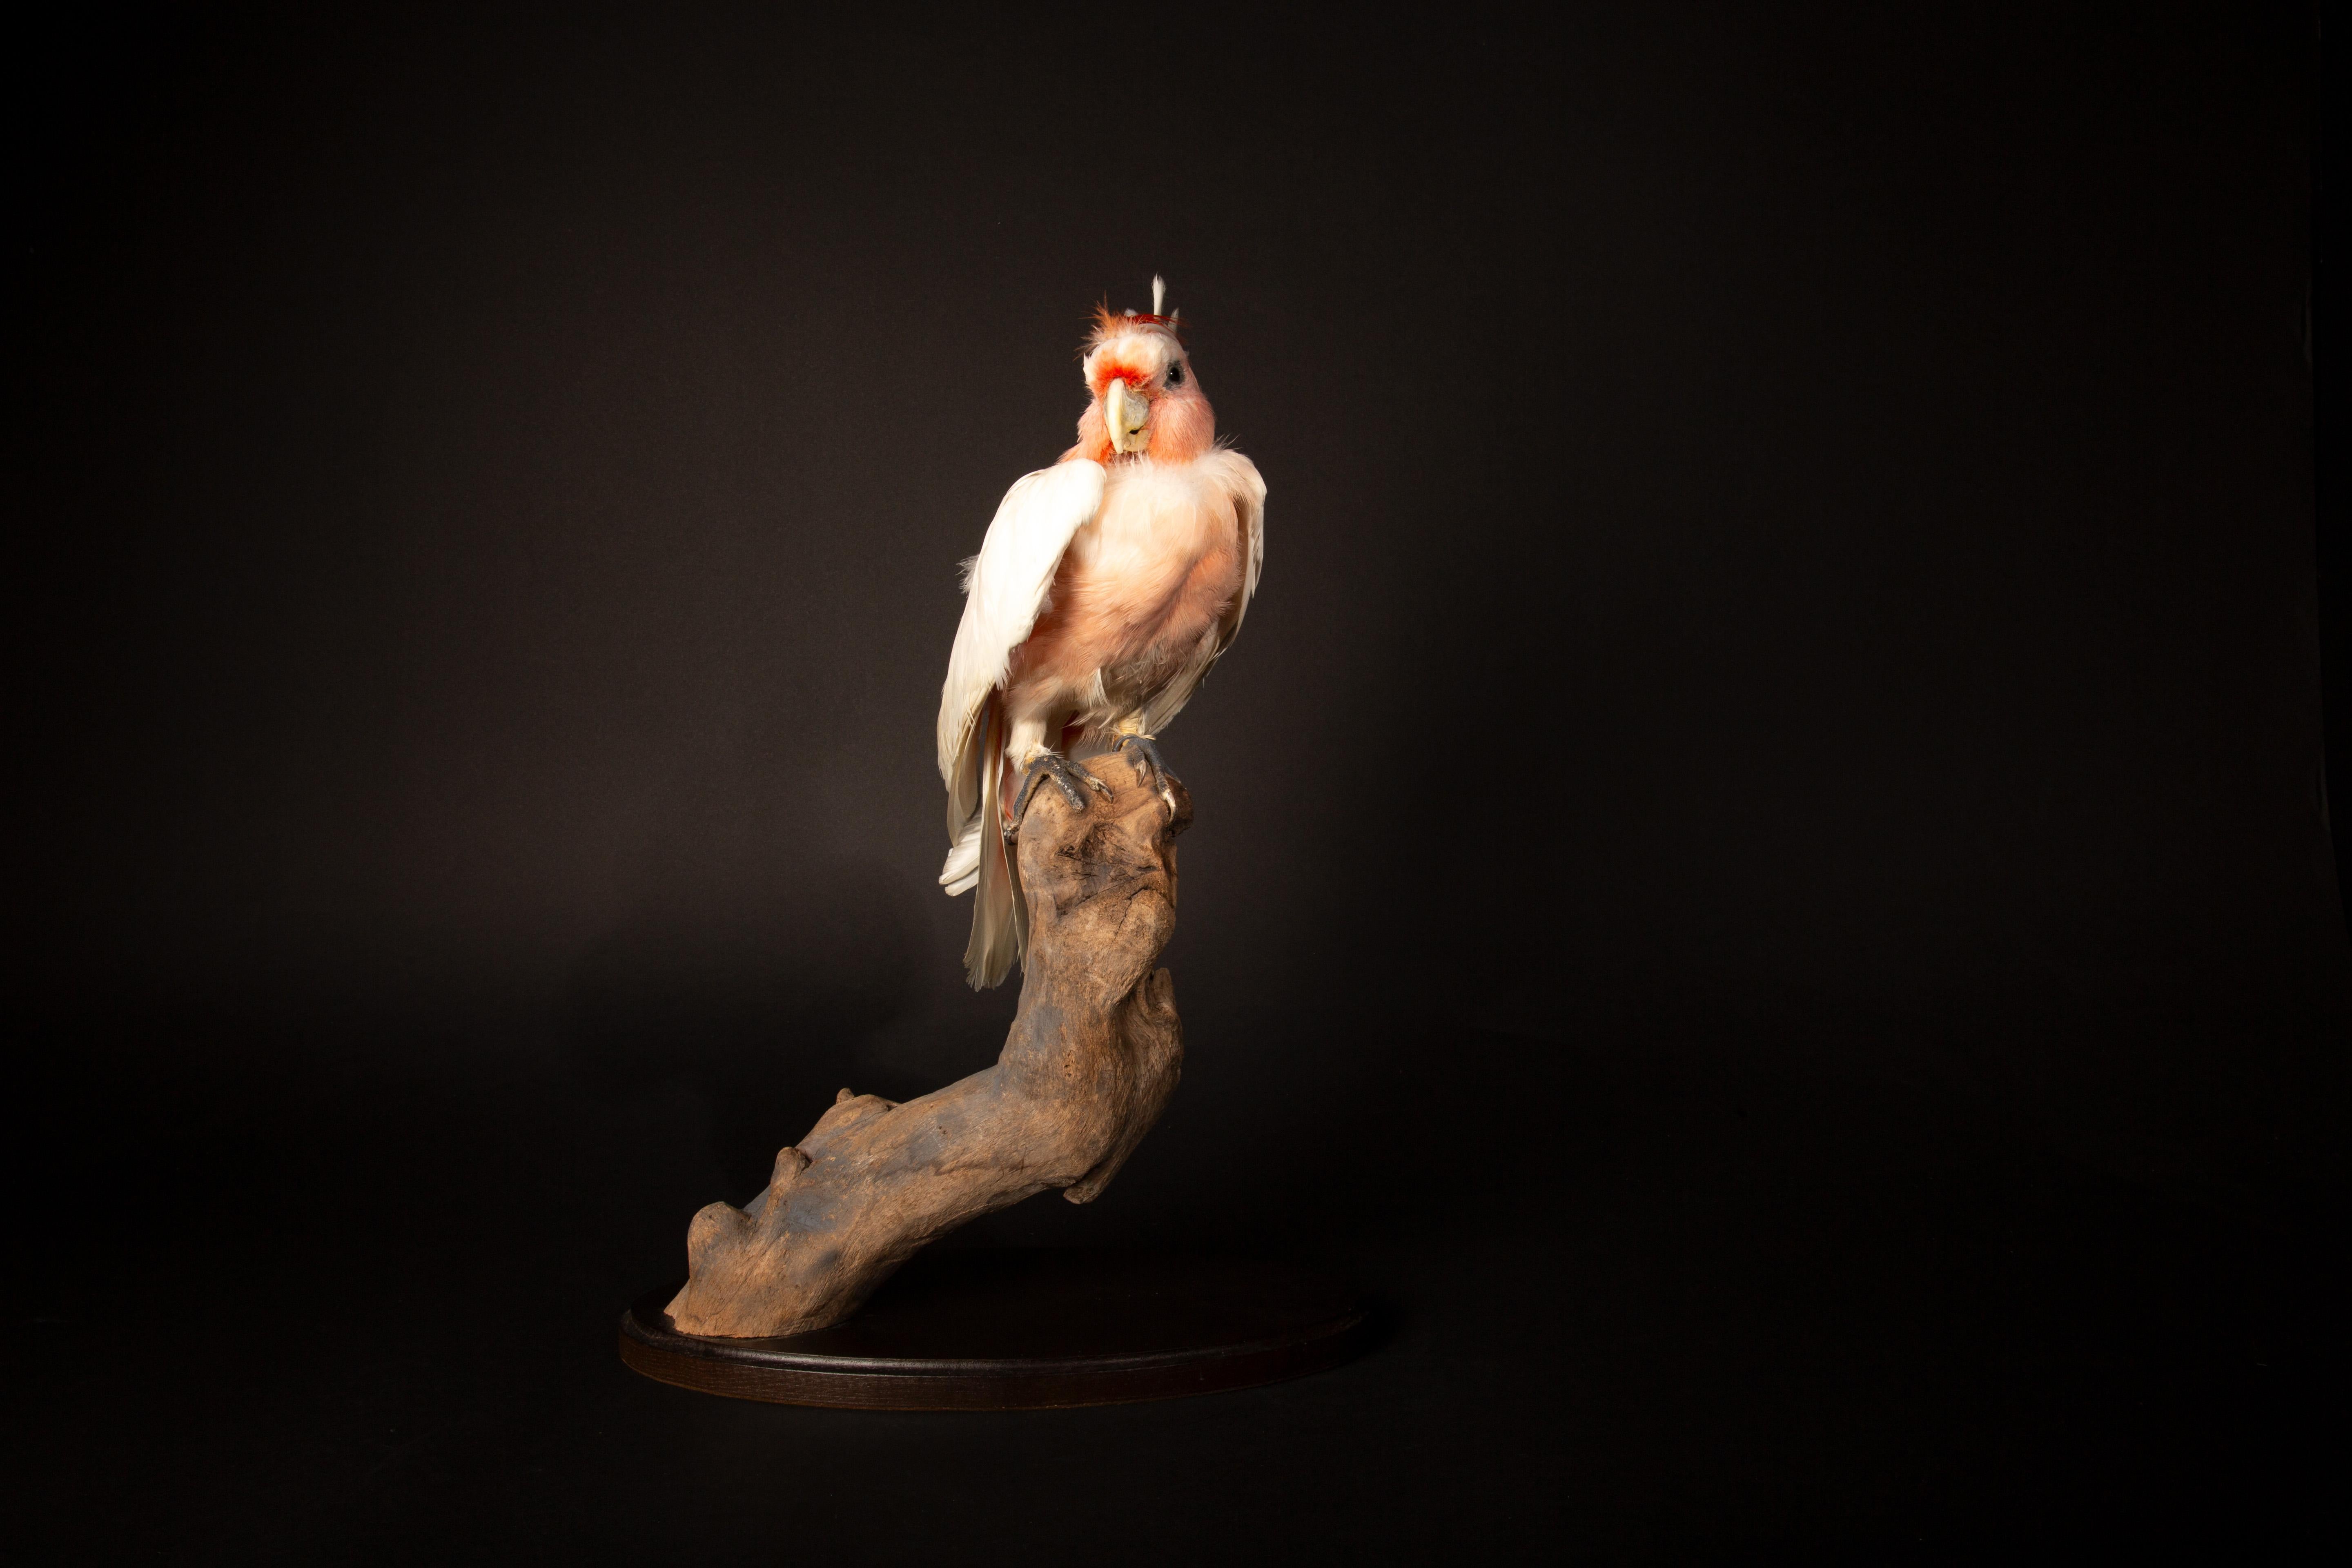 This Major Mitchell's Cockatoo Taxidermy Mount is an exquisite representation of the beauty inherent in this iconic bird species. Carefully arranged, its soft pink and white plumage vividly captures the bird's natural grace, accentuating the vibrant